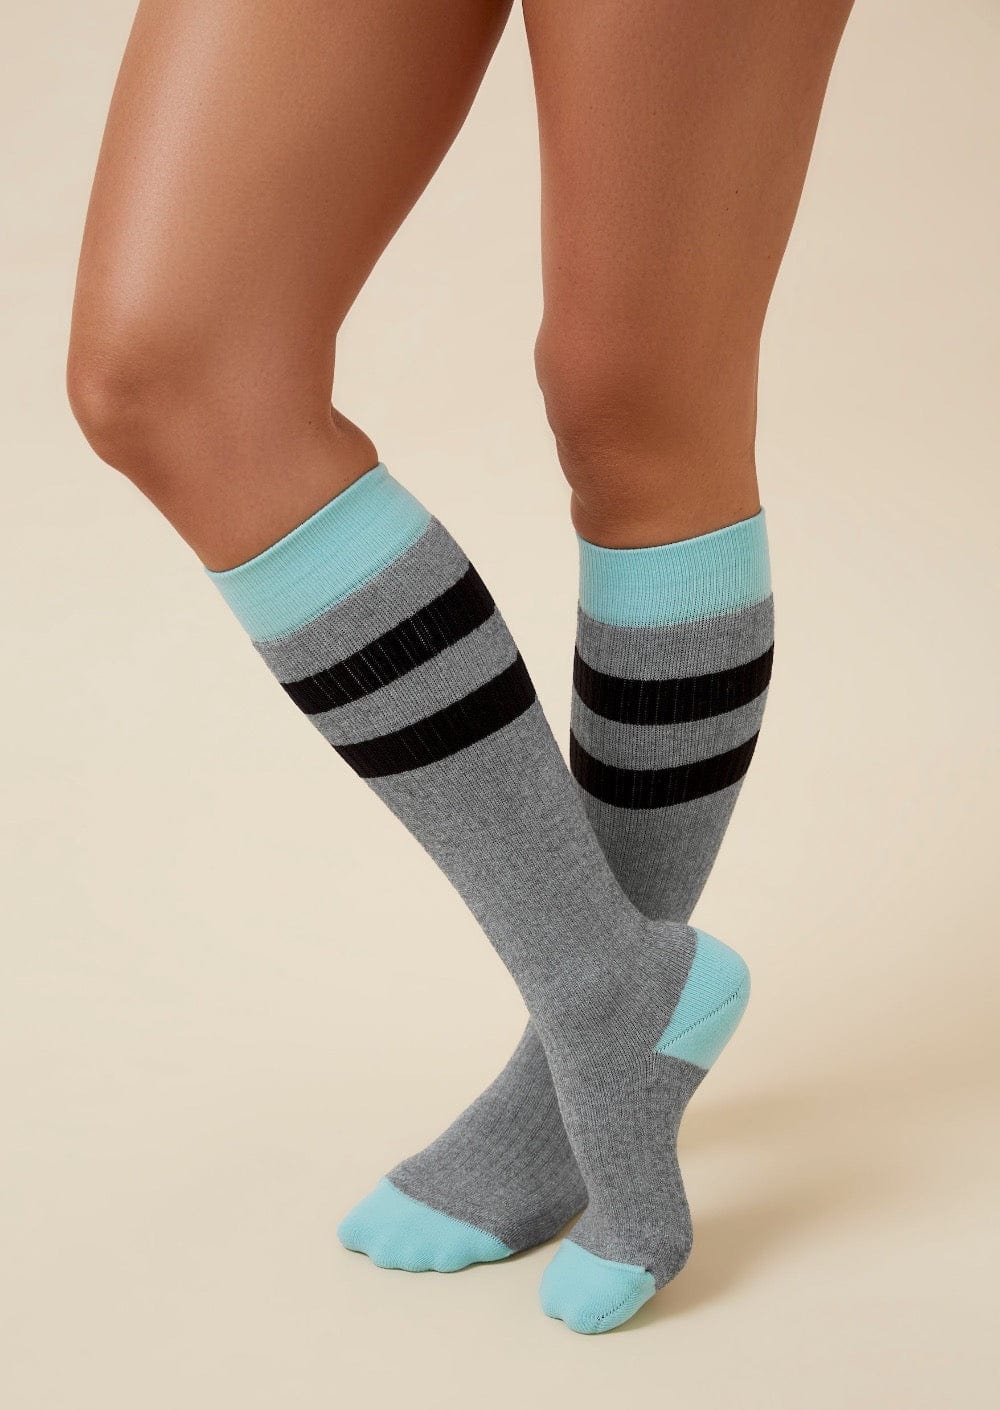 Thery Group Socks Grey Marle/Mint The Comforter Maternity Compression Sock - side view